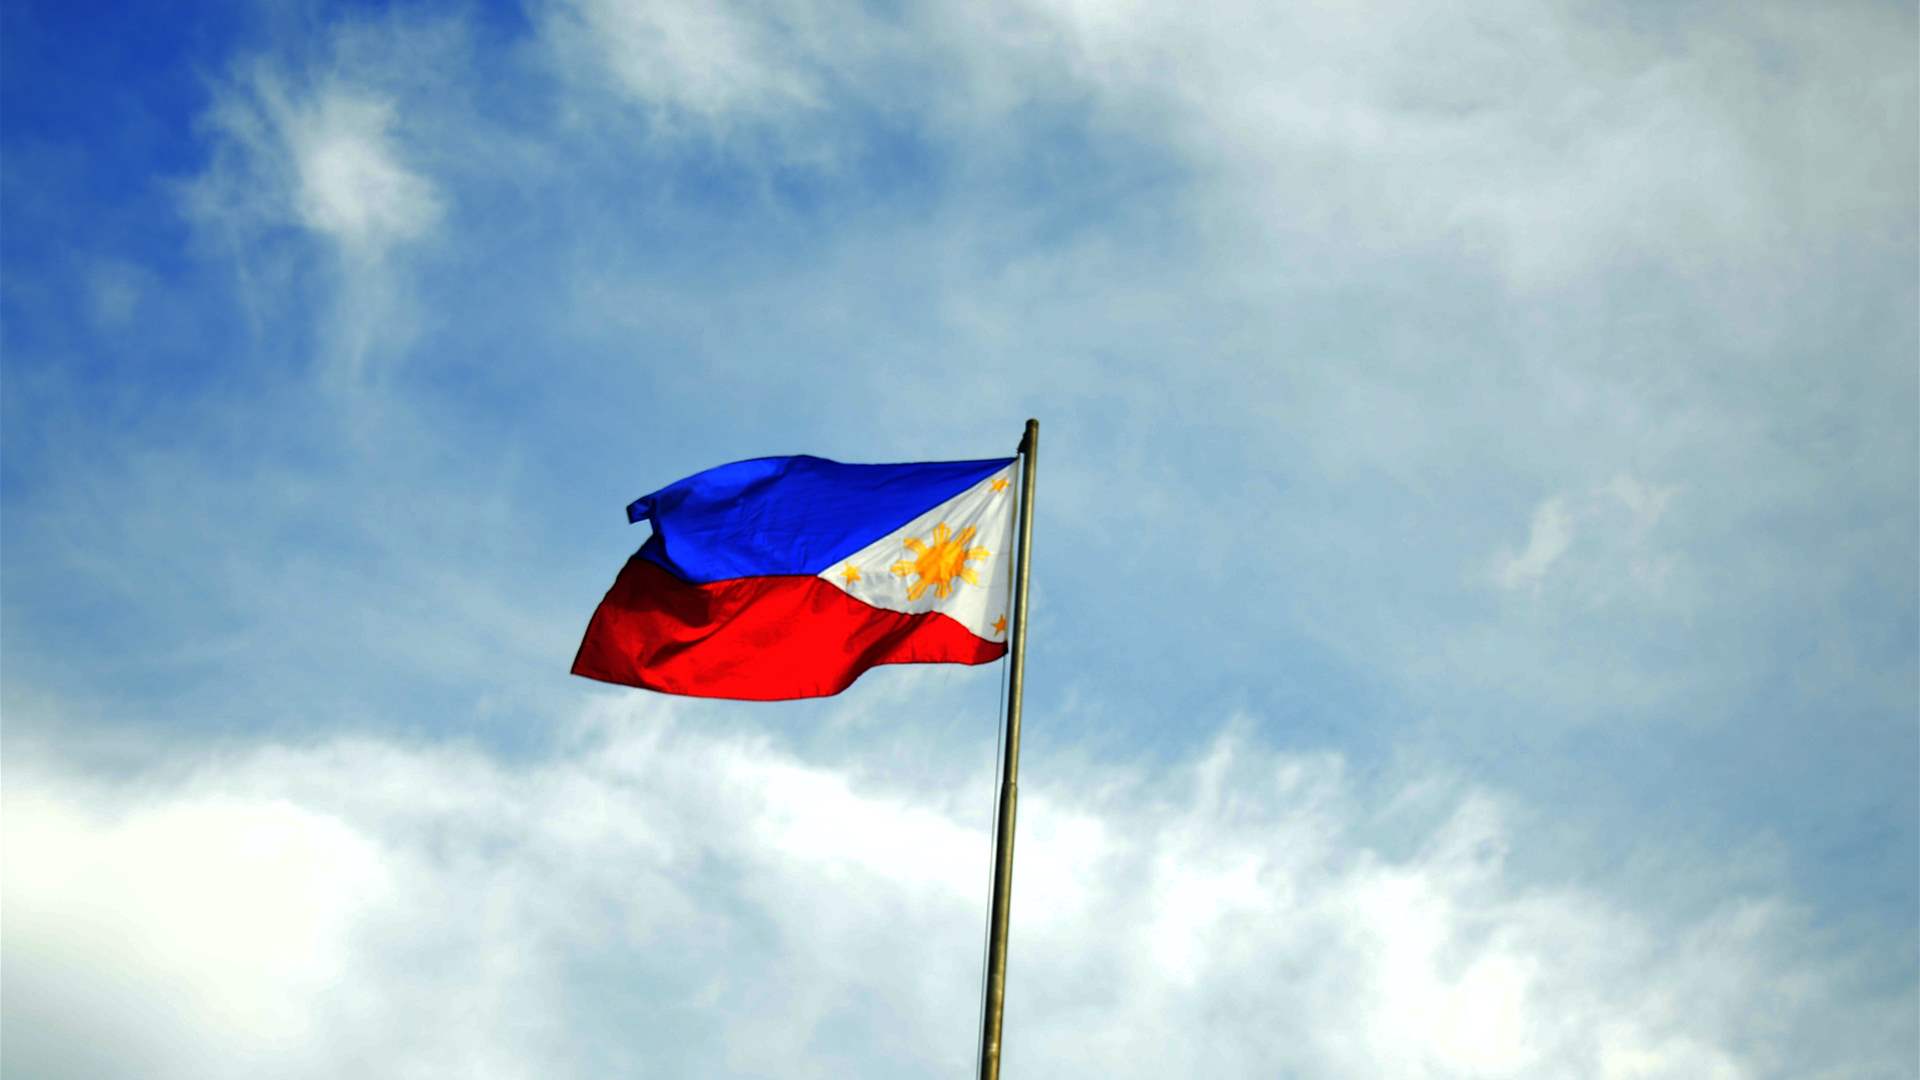 Philippines c.bank stays in inflation-fighting mode, hikes rates by 25 bps